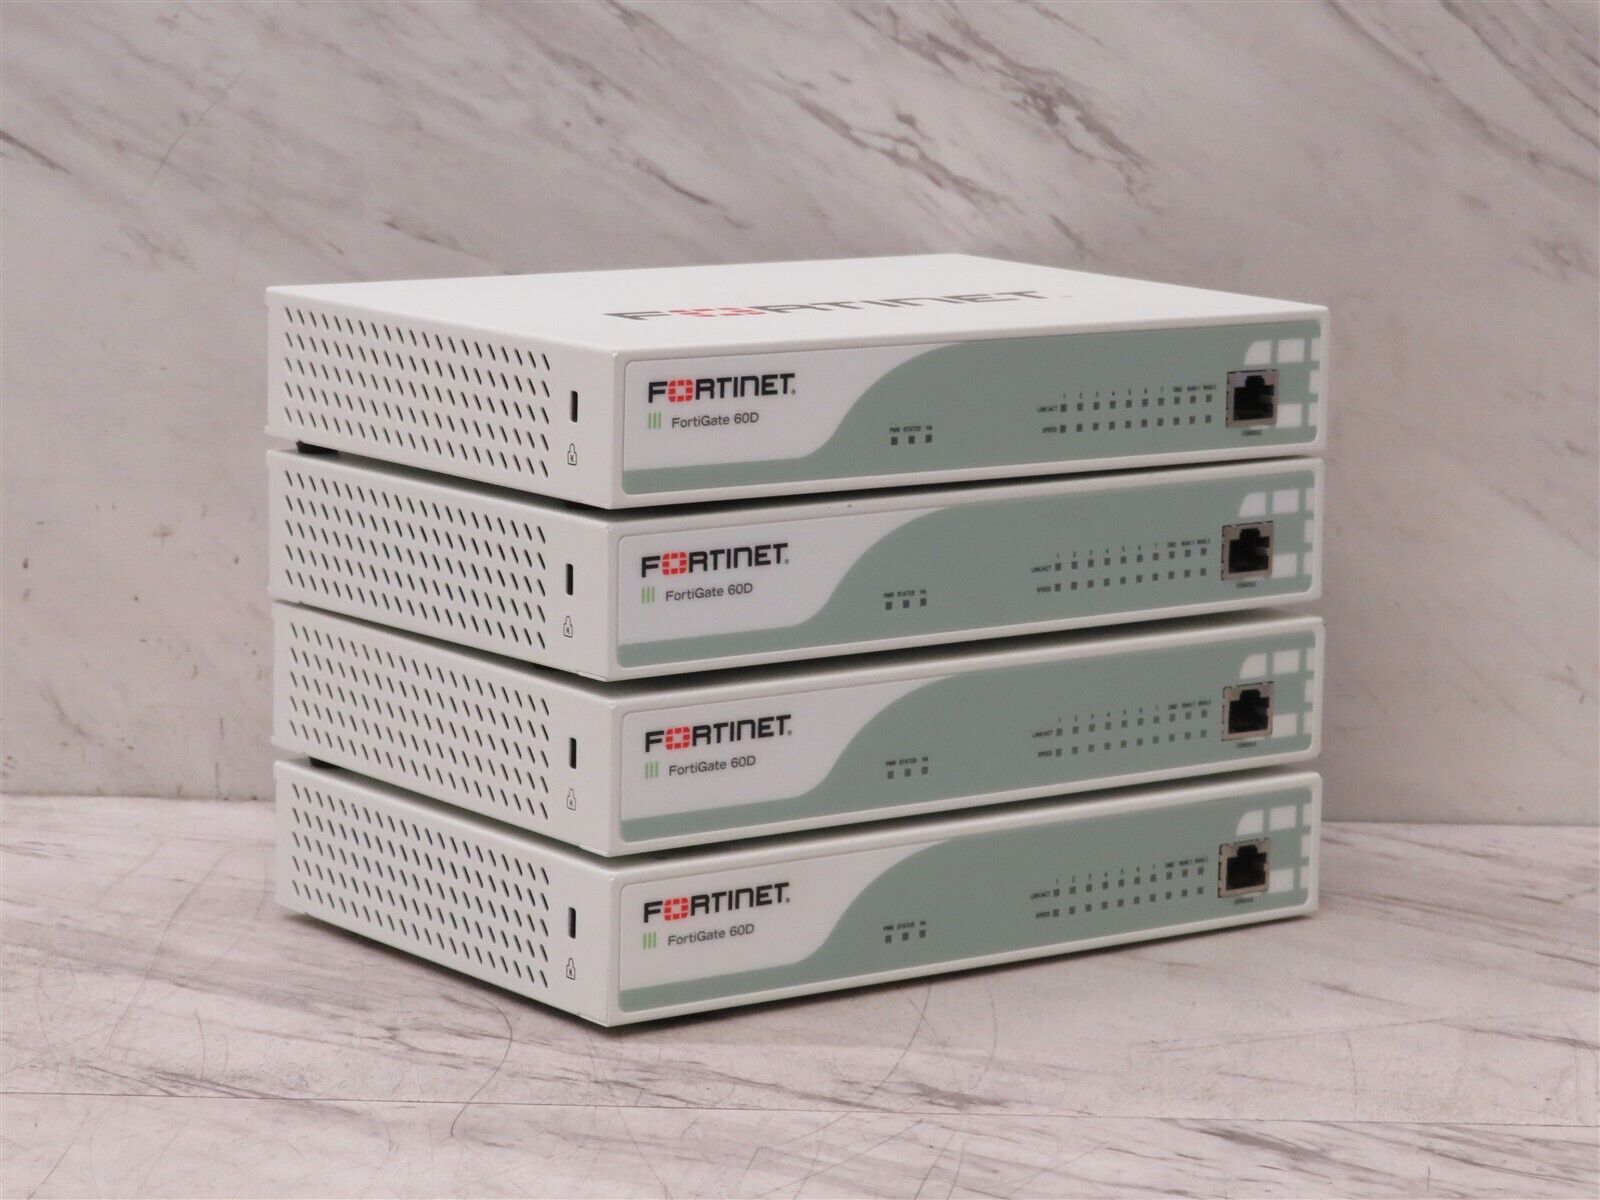 Lot of 4 Fortinet Fortigate FG-60D Firewall Security Appliance UNCLAIMED